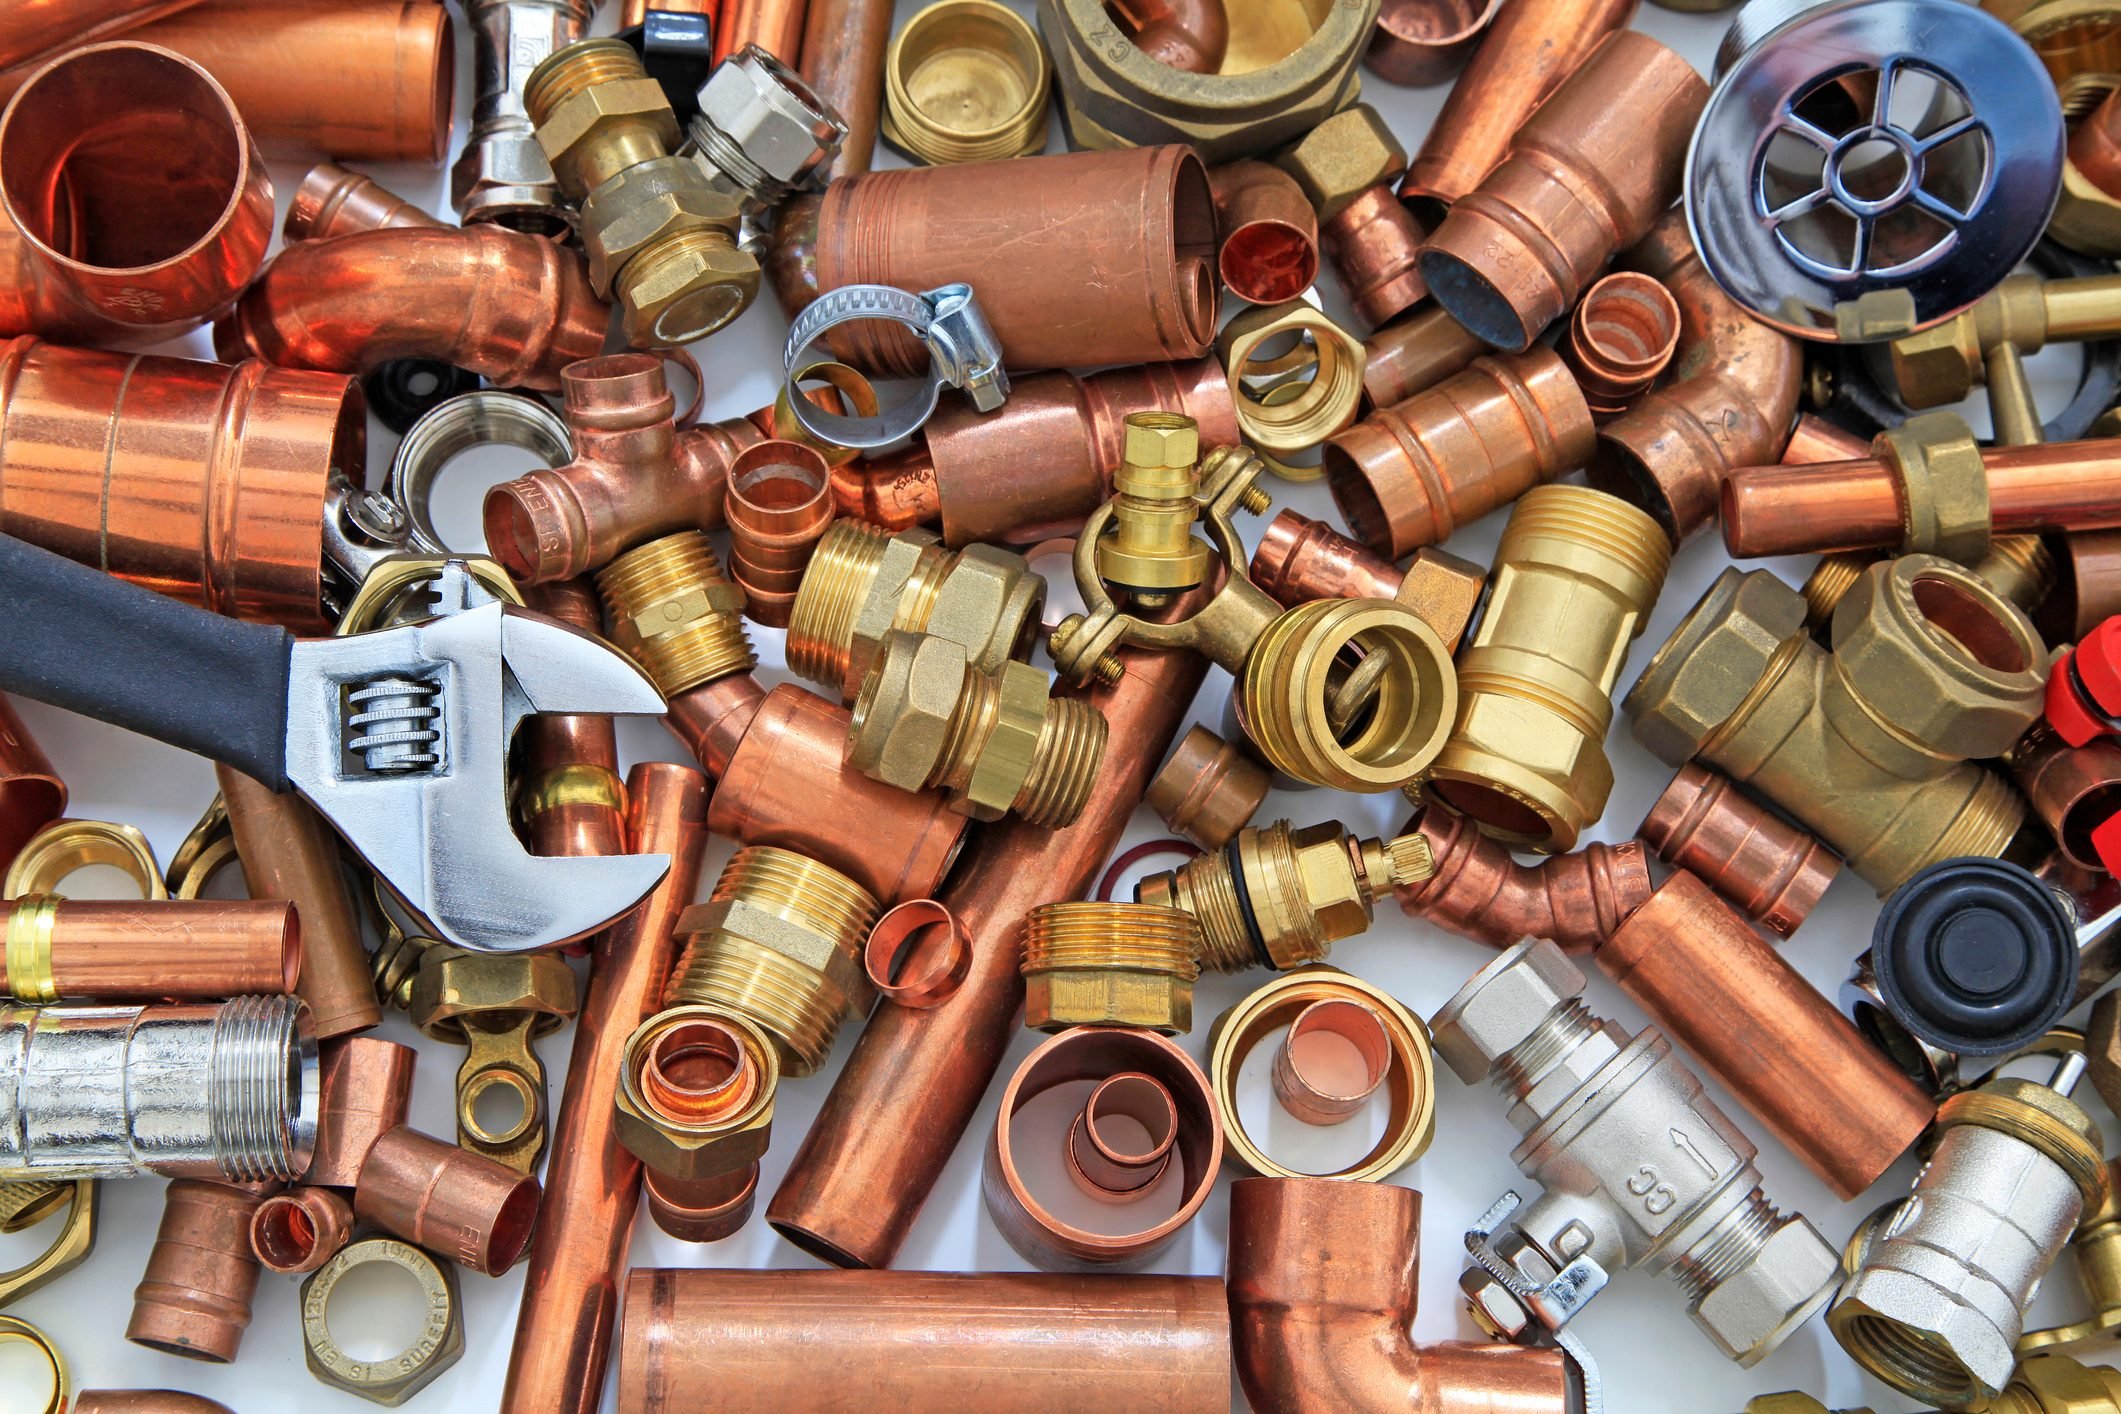 How Does Compression Fitting Work And Why Is It Important In Plumbing?